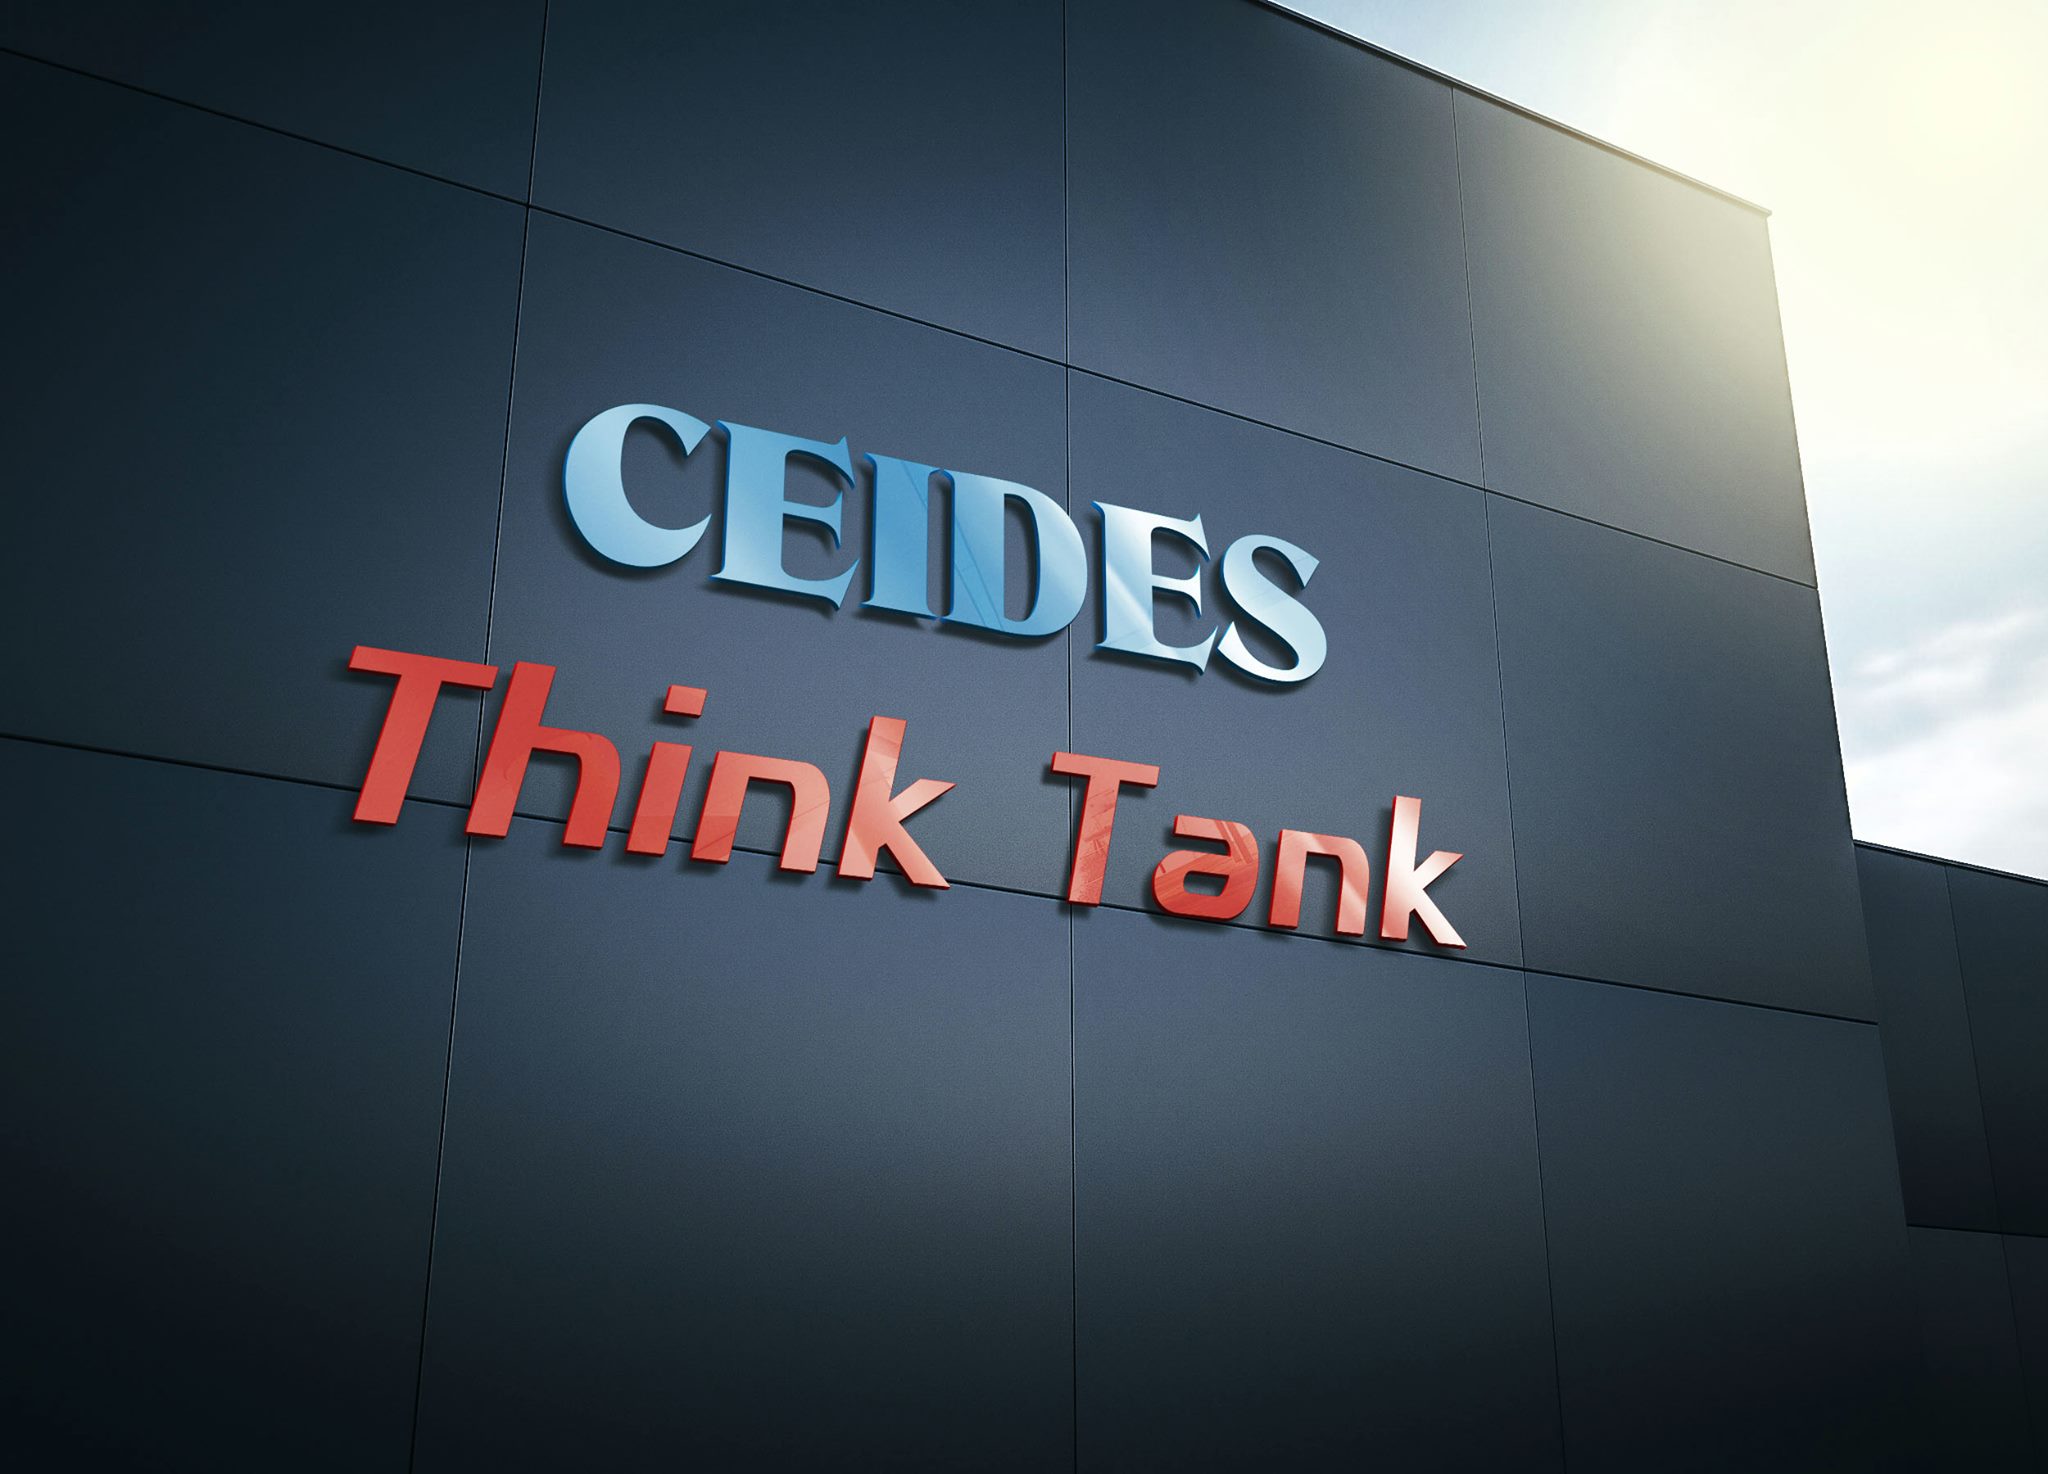 You are currently viewing Rentrée 2022/2023 du Think Tank CEIDES